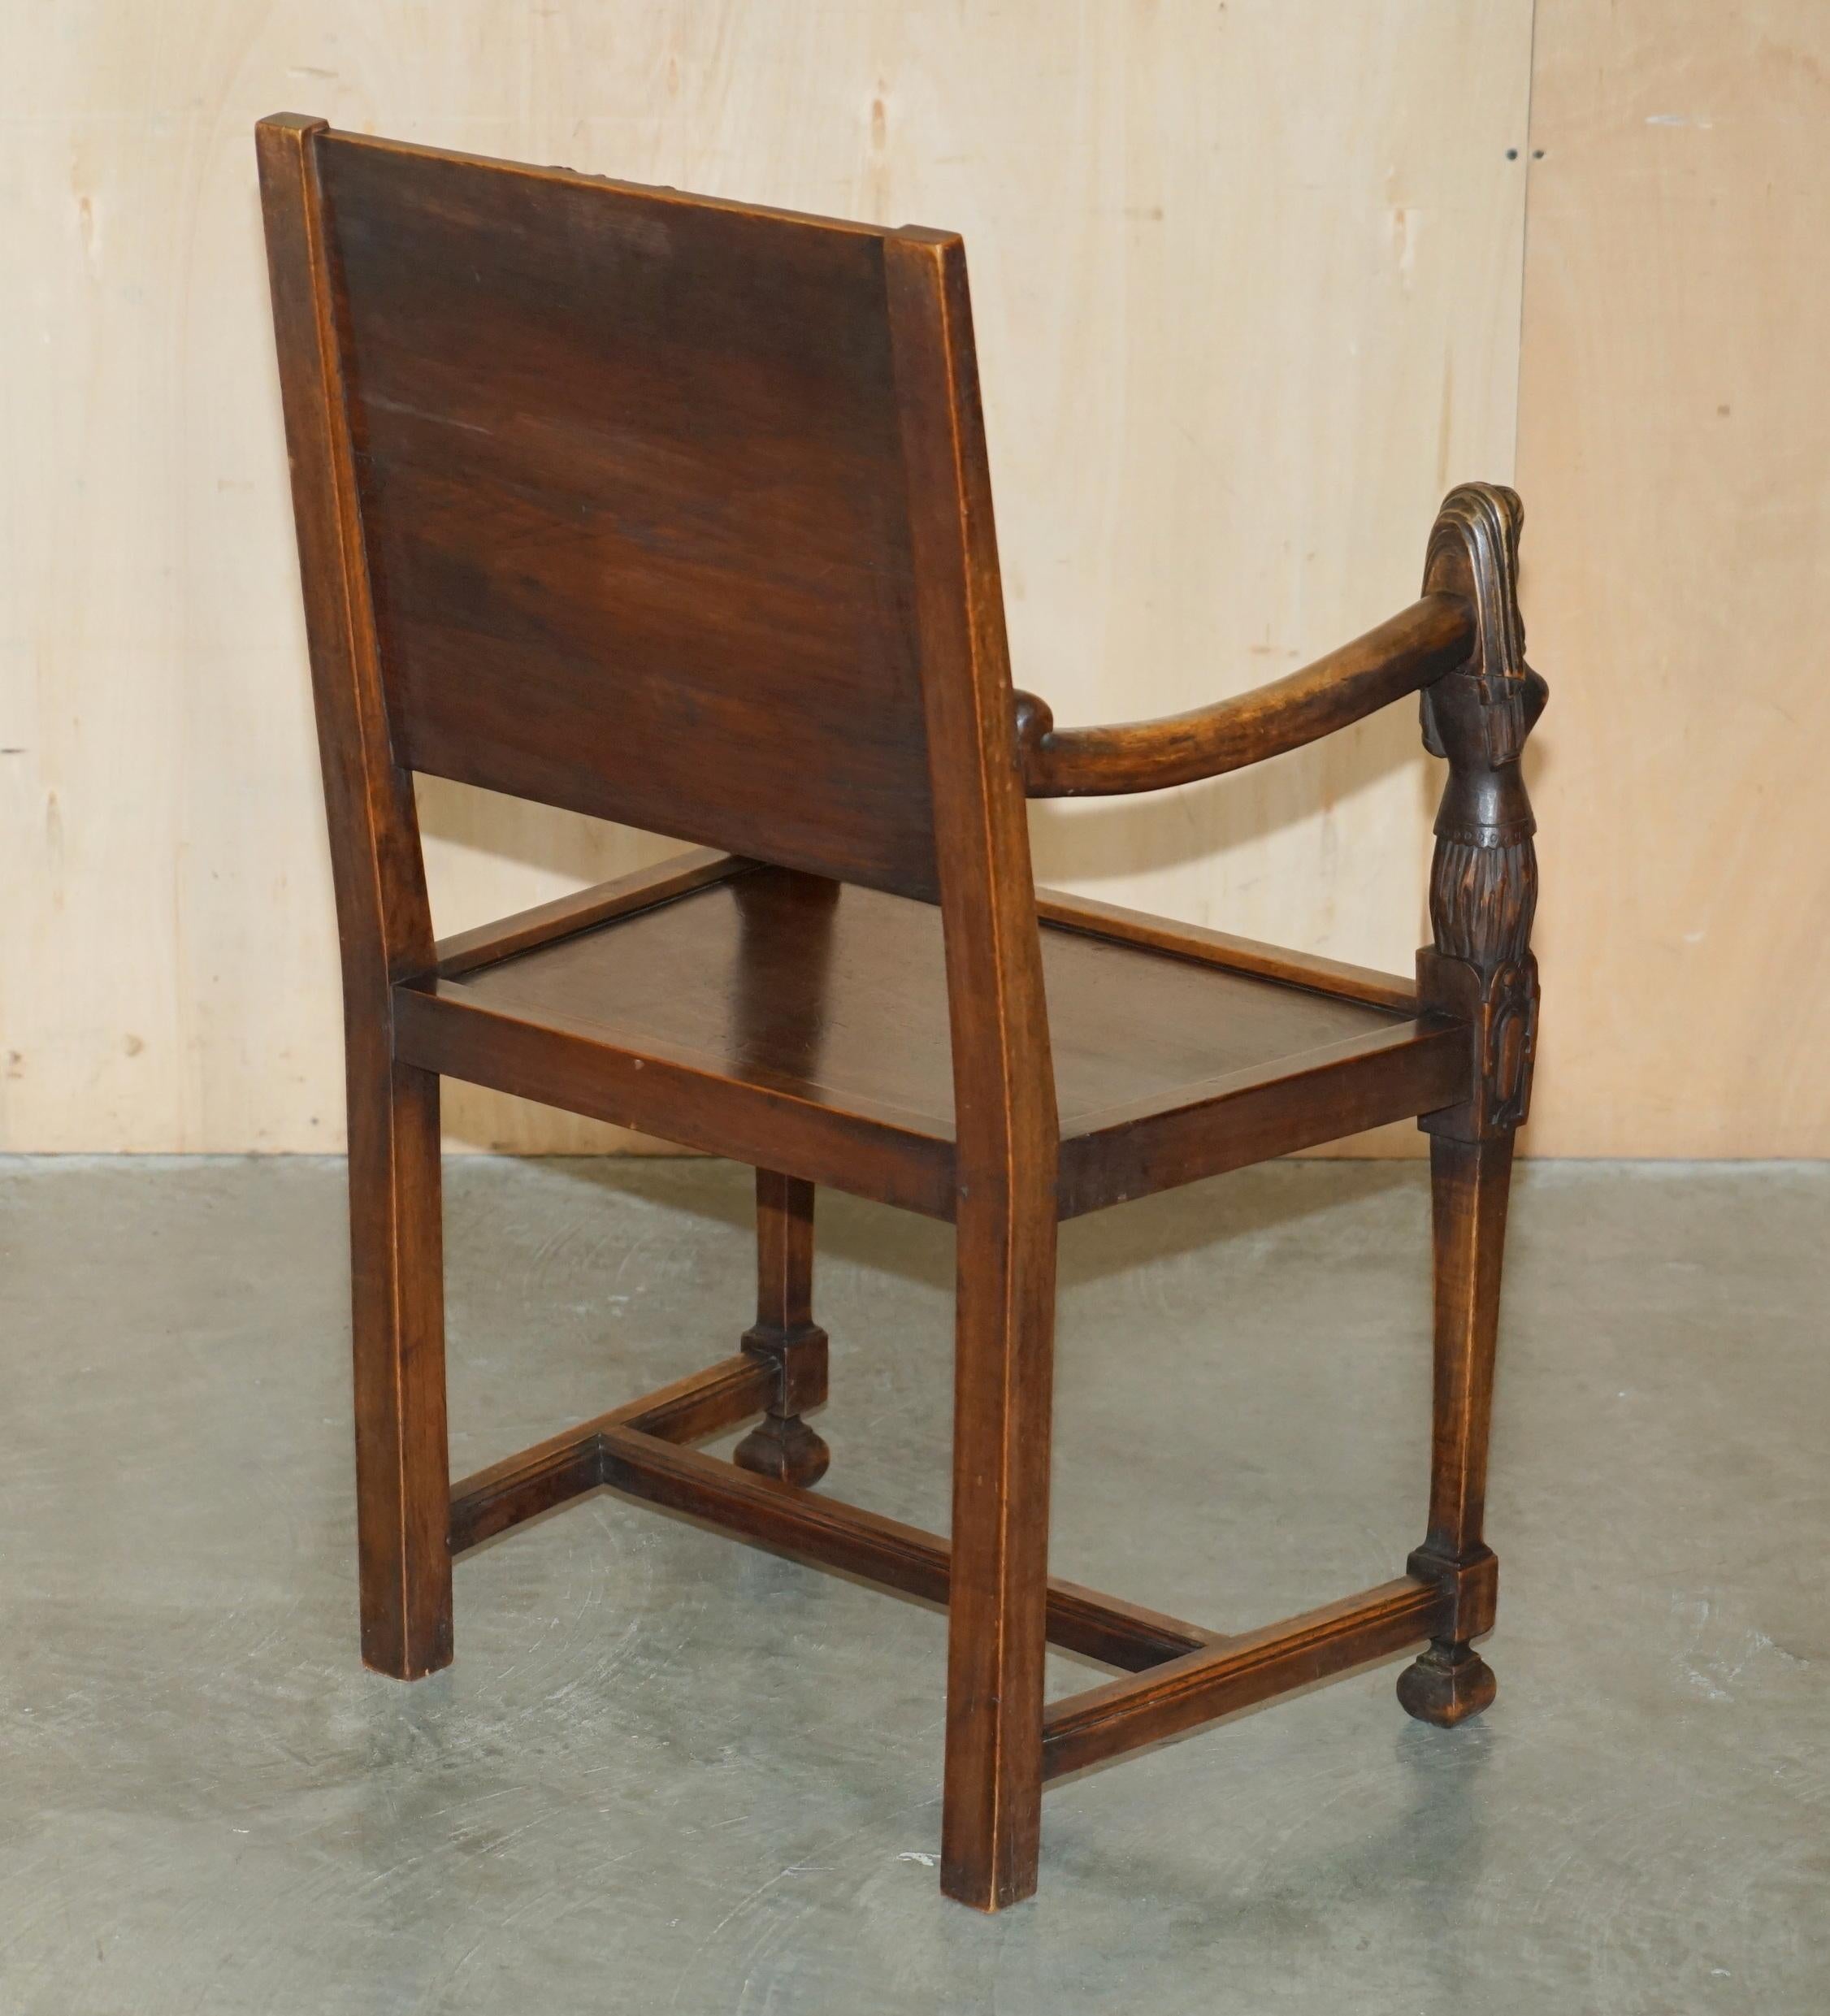 PAIR OF ORNATELY CARved NEO-GOTHIC SOLiD WALNUT 19TH CENTURY CEREMONY ARMCHAIRS im Angebot 10